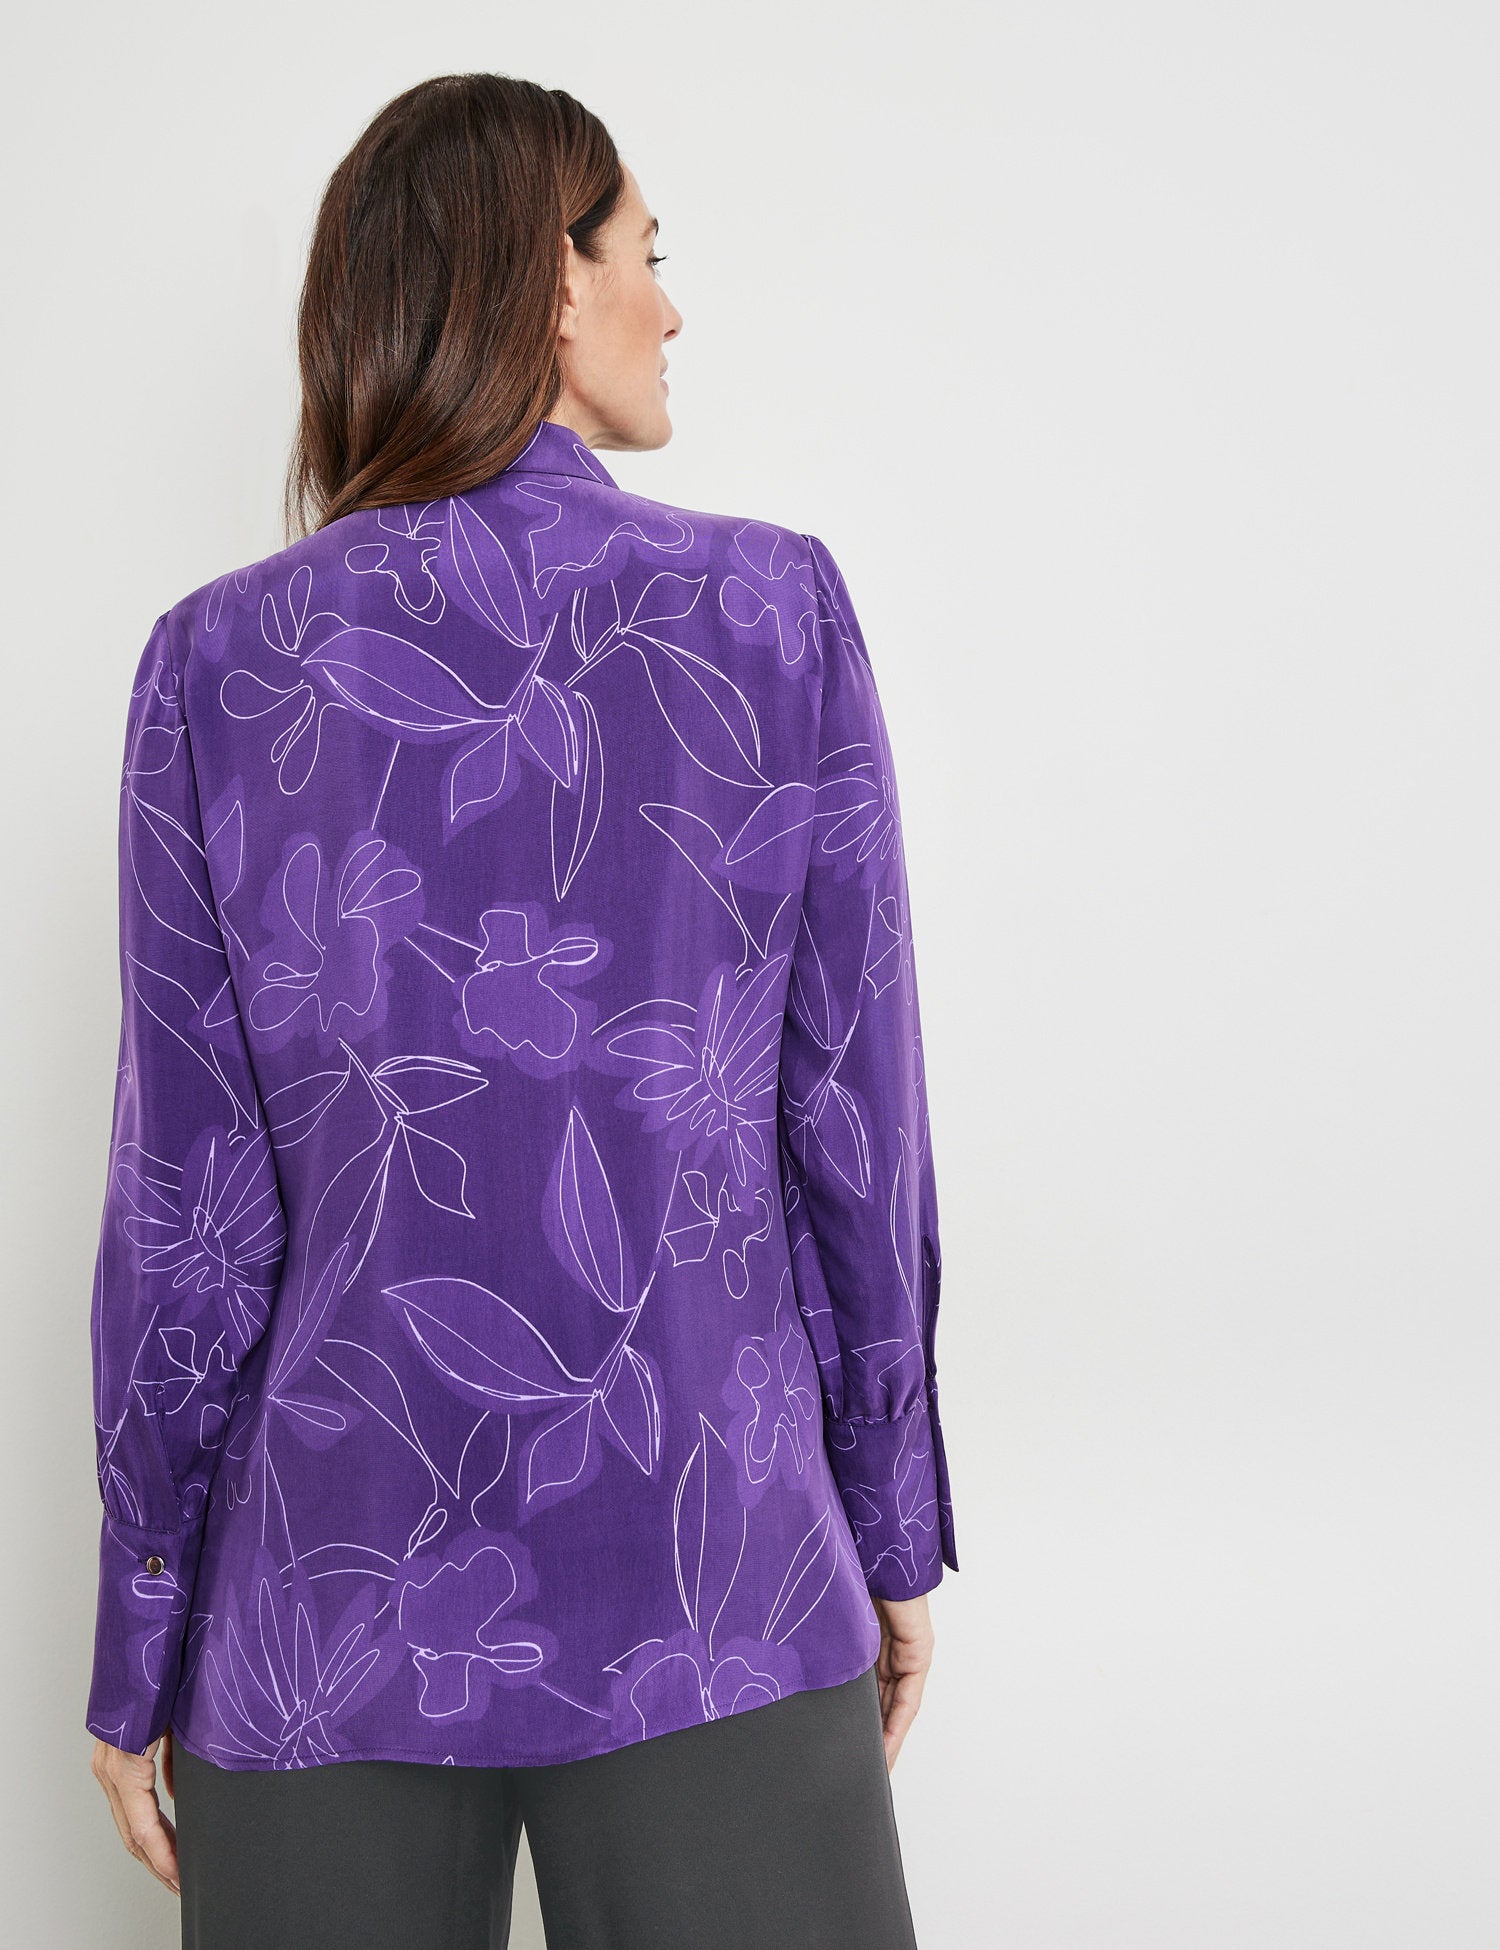 Long Sleeve Blouse With A Floral Pattern And Hem Slits_160062-66452_3039_06